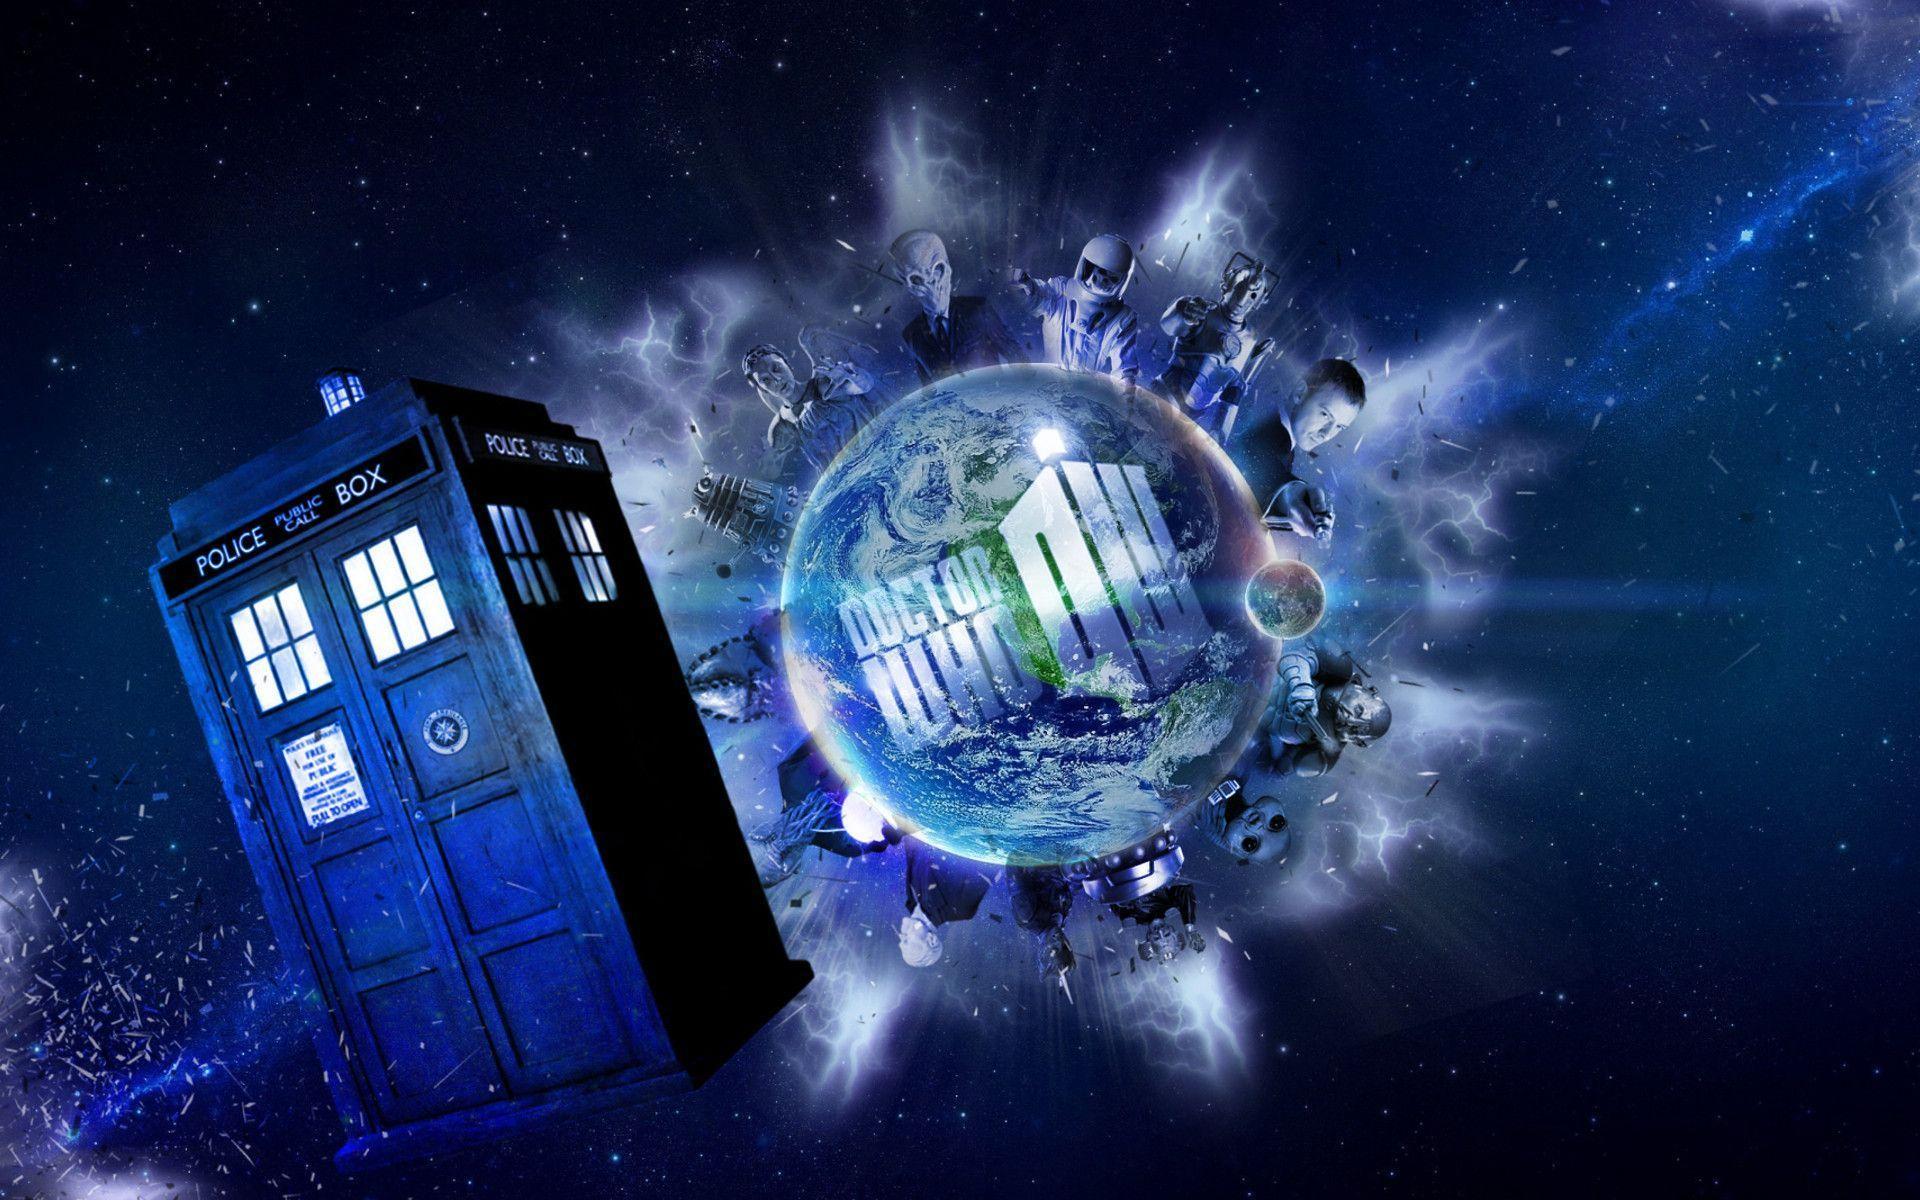 SsyM9us doctor who wallpaper HD free wallpaper background image